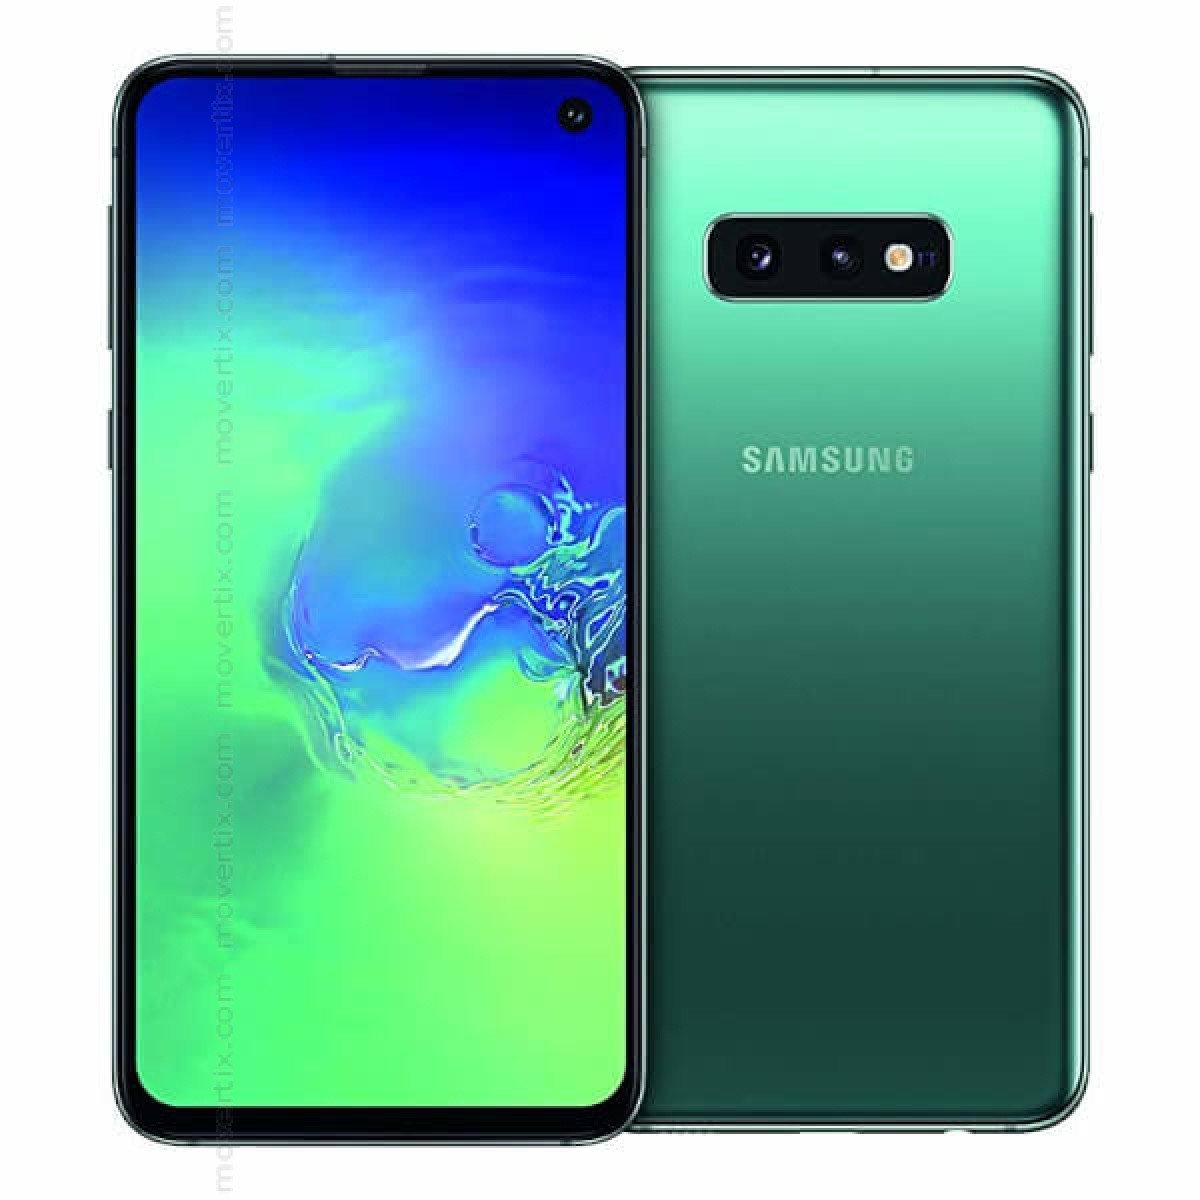 Samsung Galaxy S10e Snapdragon Full Specification and Price | DroidAfrica